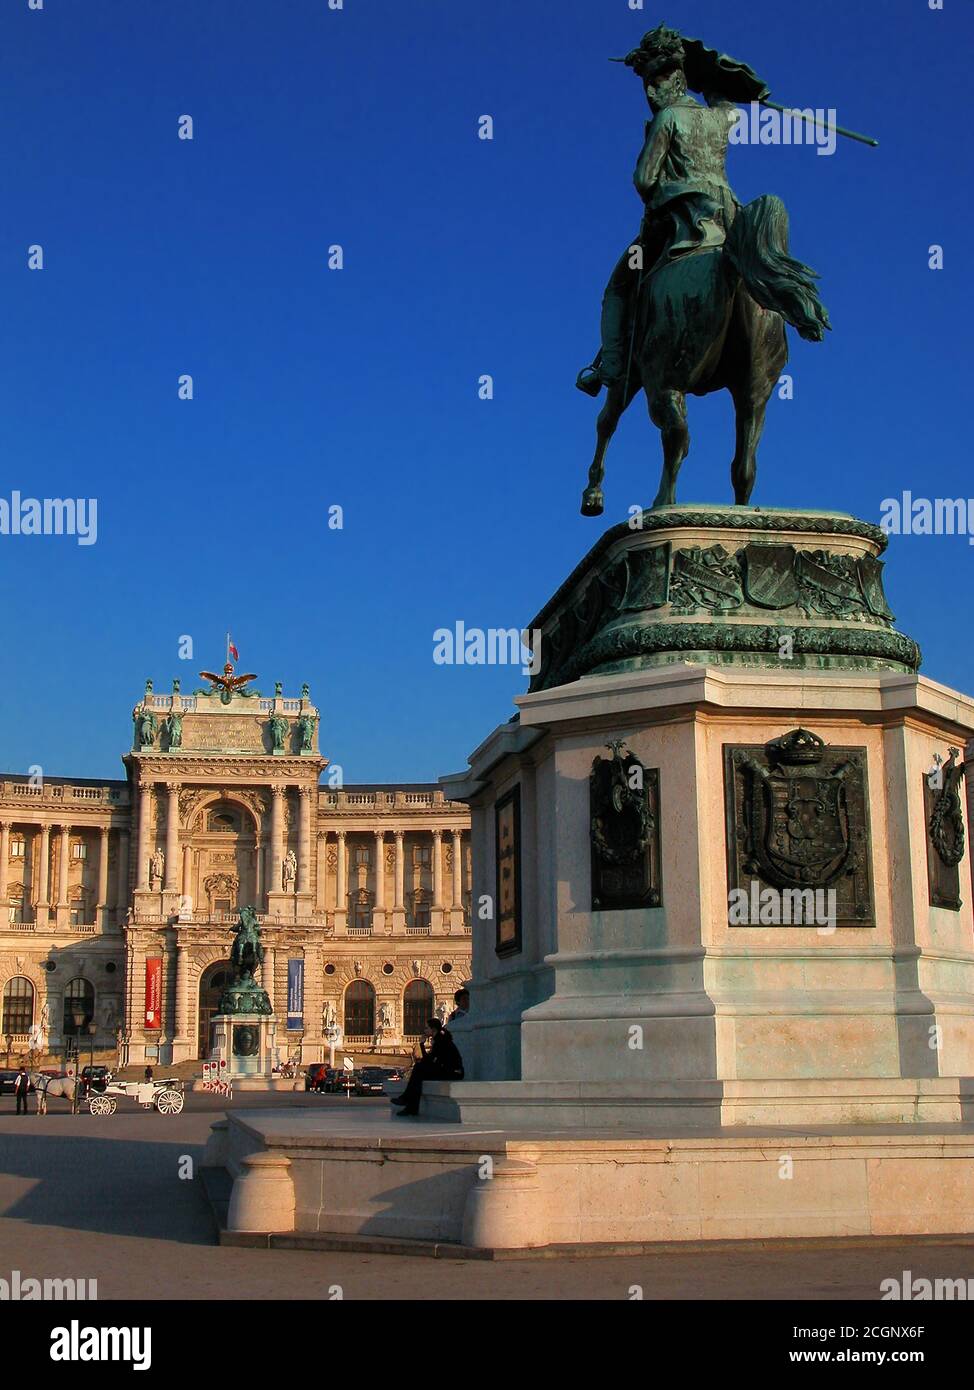 Statue of Archduke Charles by Anton Dominik Fernkorn in Heldenplatz, with the Hofburg (Imperial Palace) beyond, Vienna, Austria Stock Photo